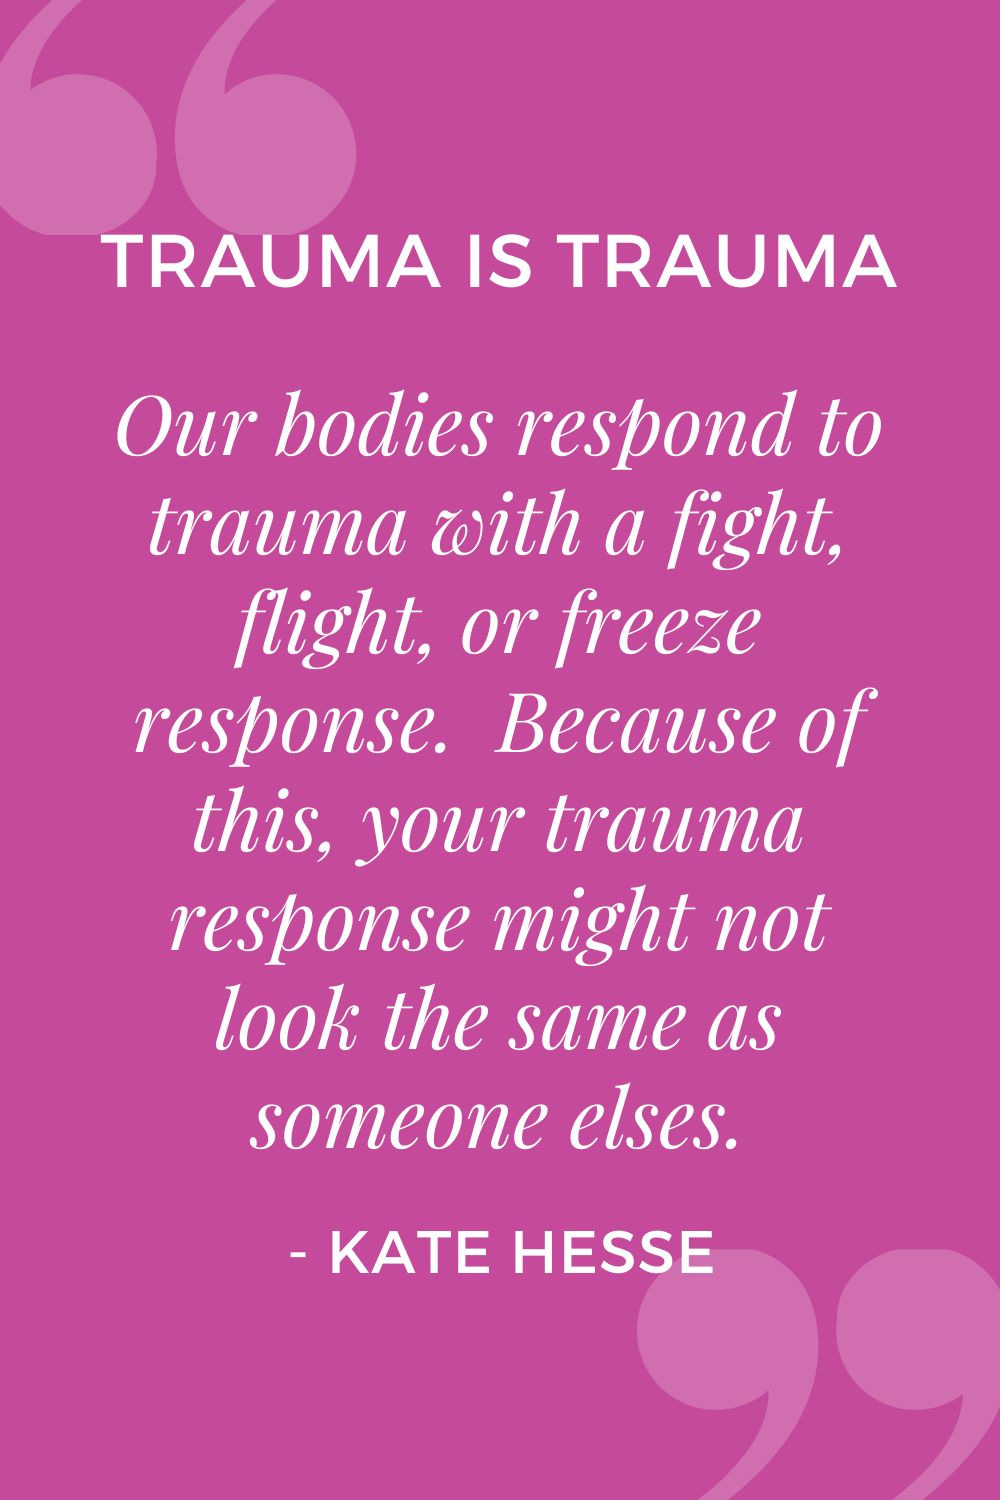 Our bodies respond to trauma with a fight, flight, or freeze response. Because if this, your trauma response might not look the same as someone elses.